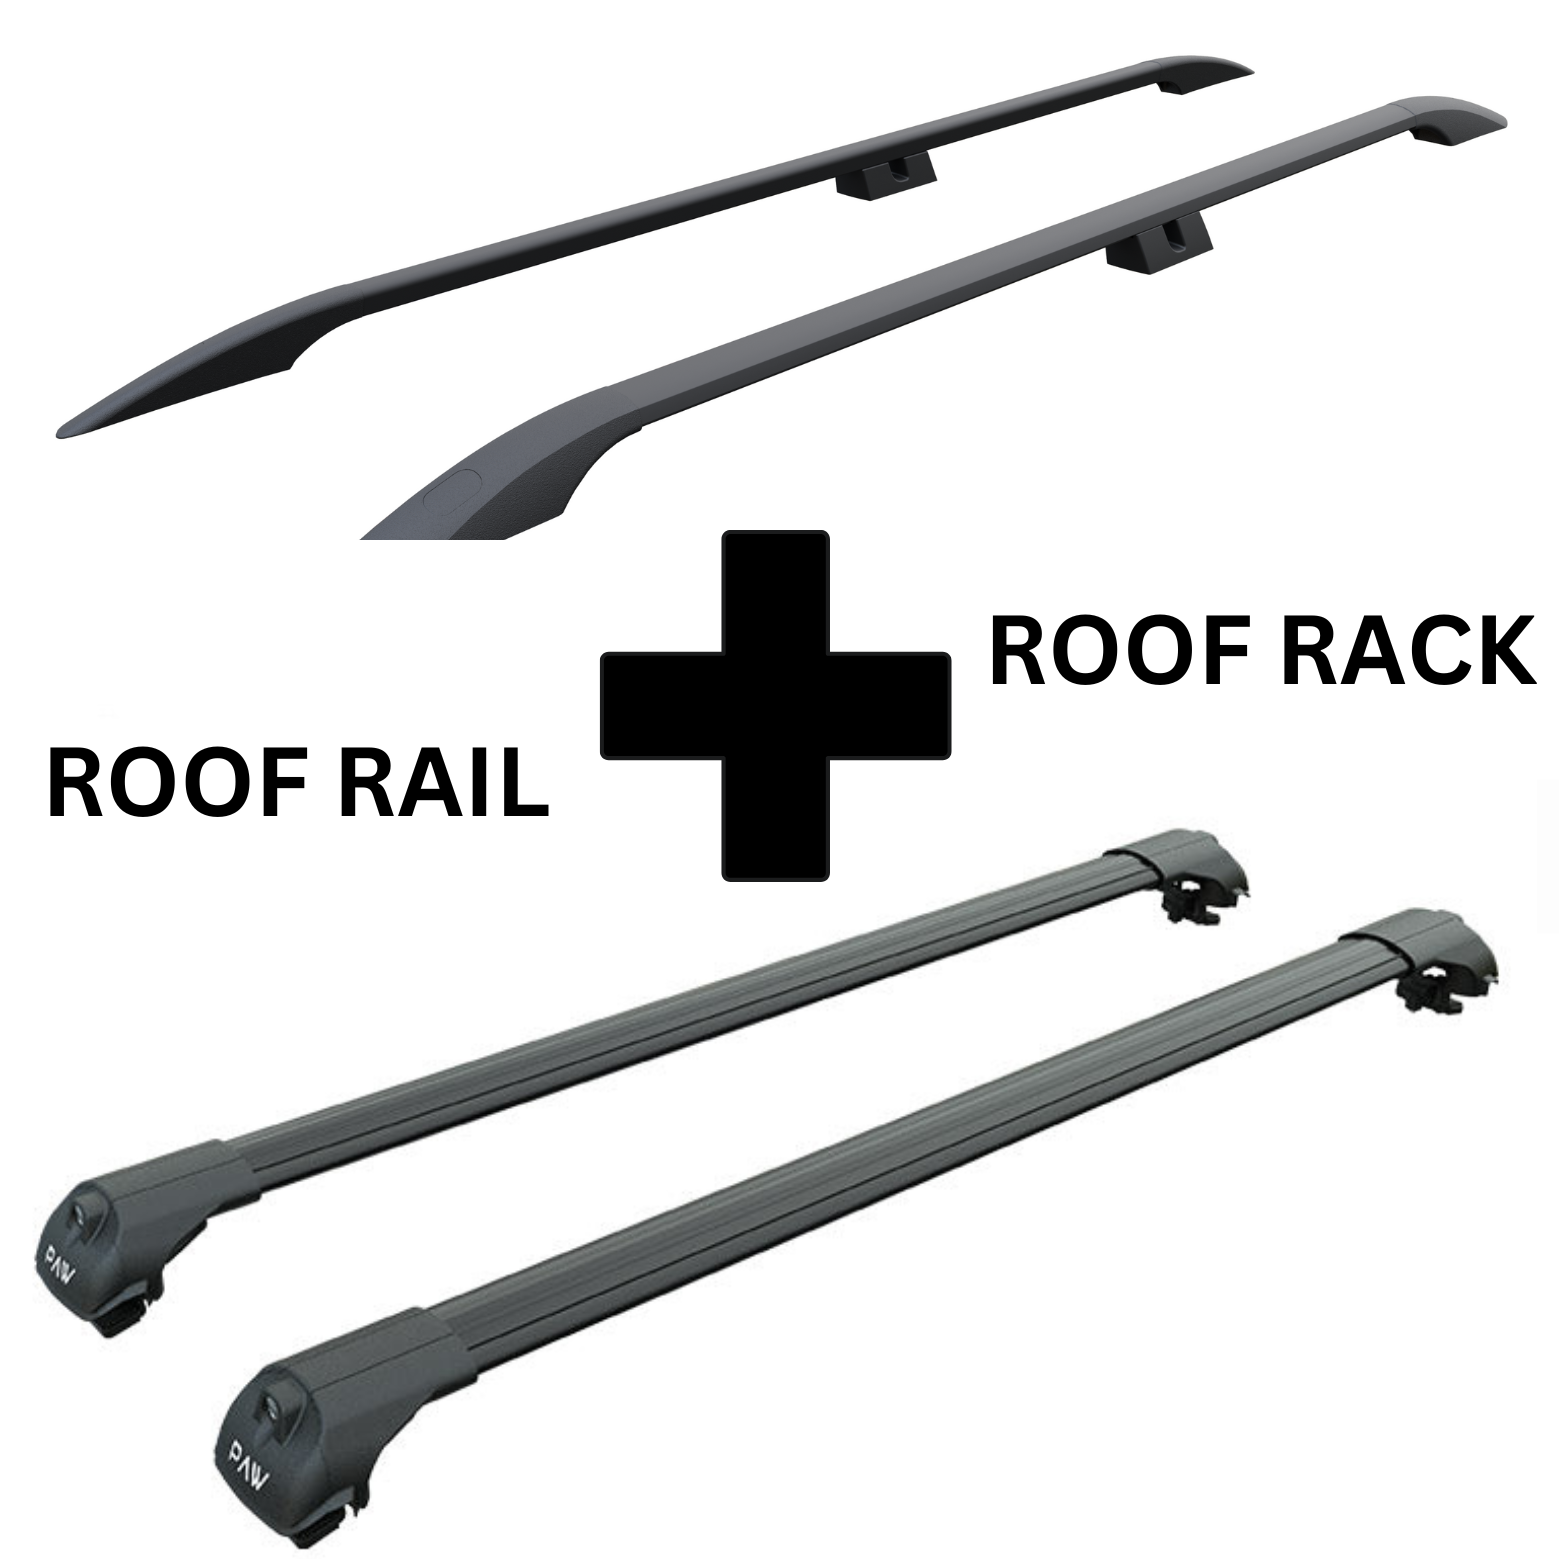 For Toyota ProAce City 2020-Up SWB Roof Side Rails and Roof Rack Cross Bar Alu Silver